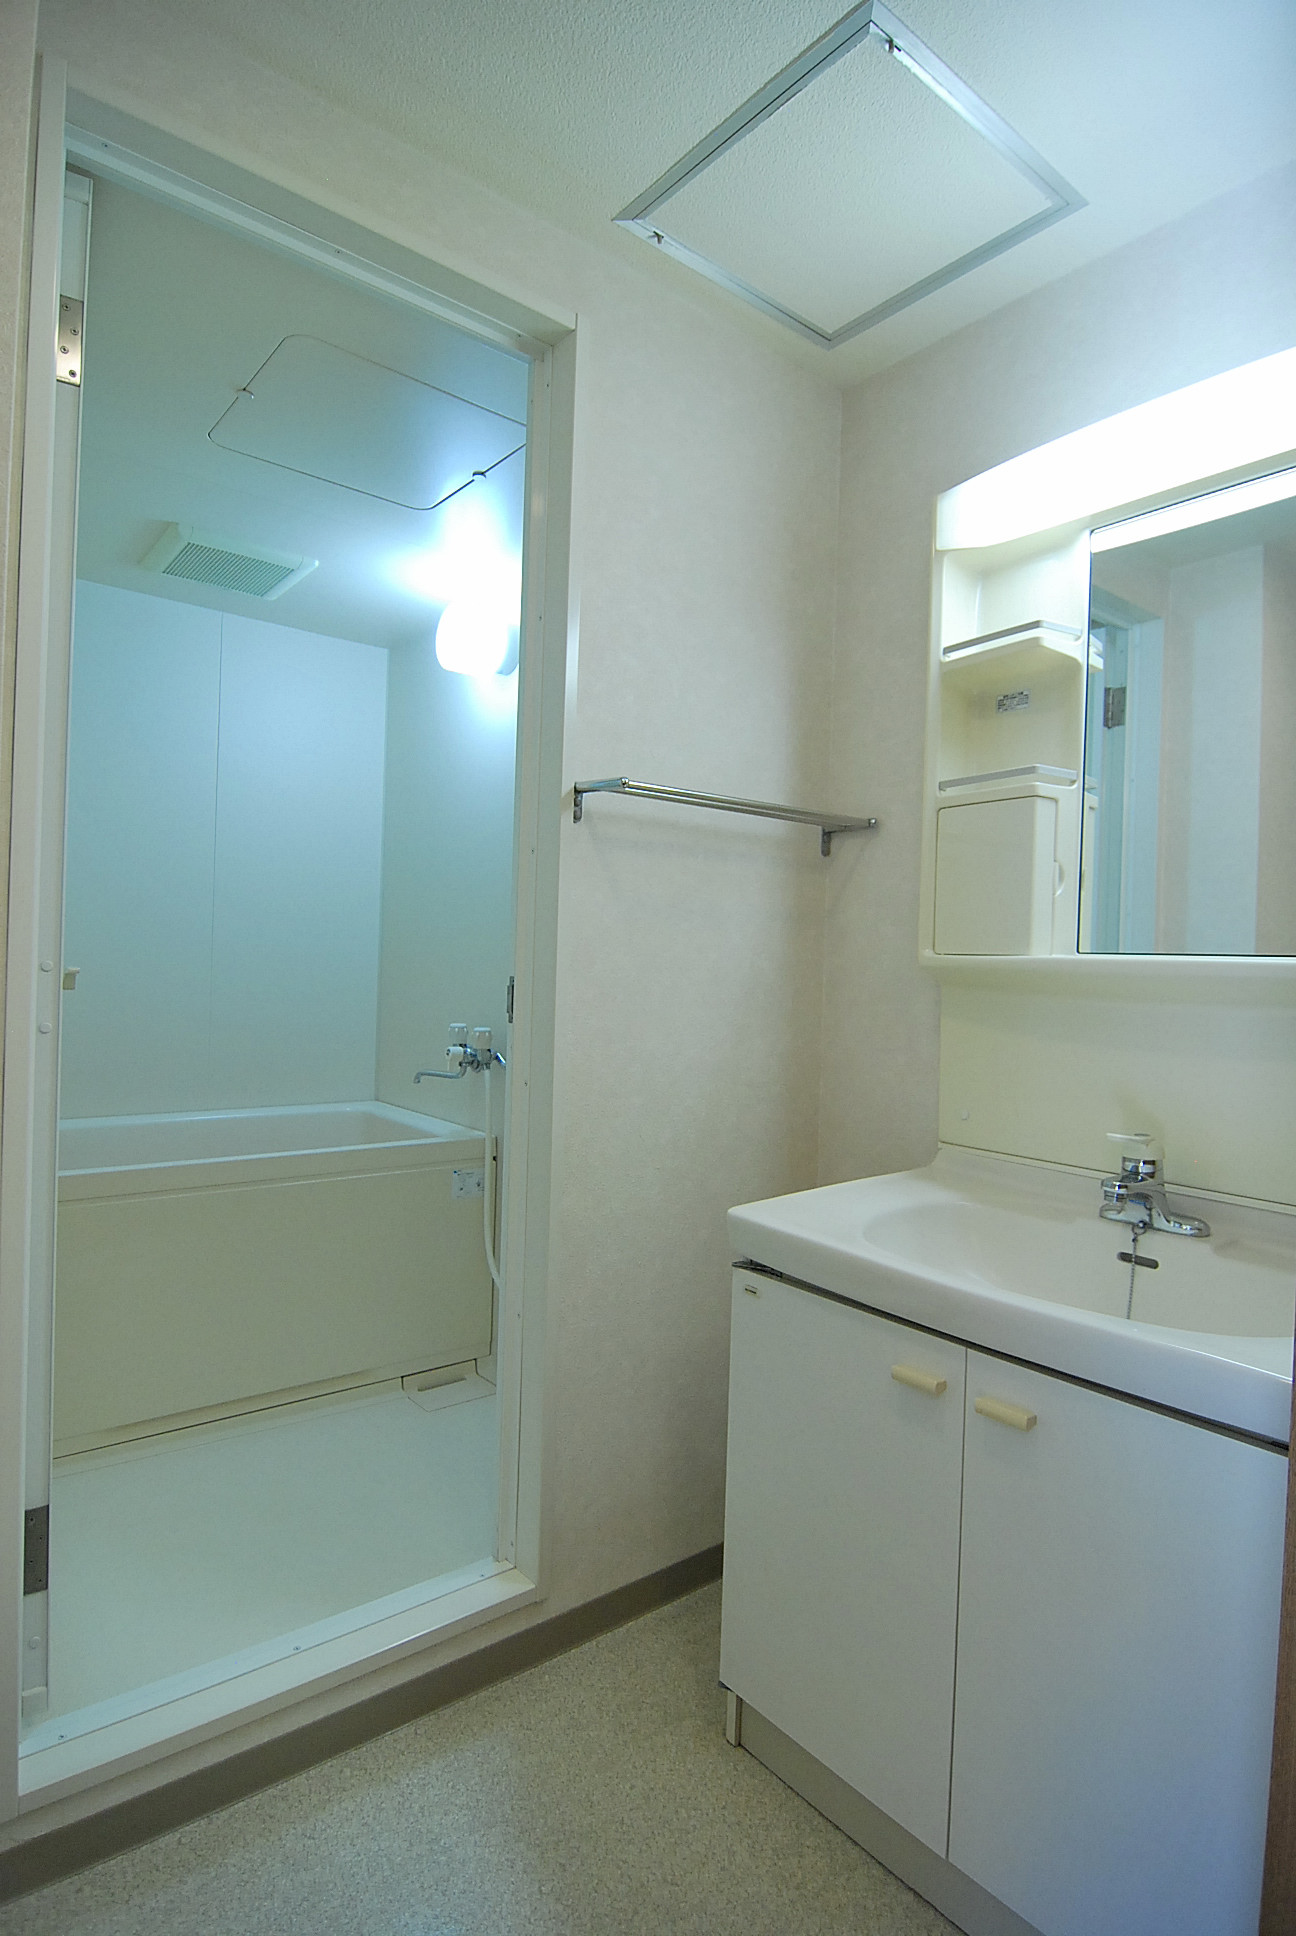 Washroom. bathroom Is a wide margin even undressing space. There Laundry Area. 